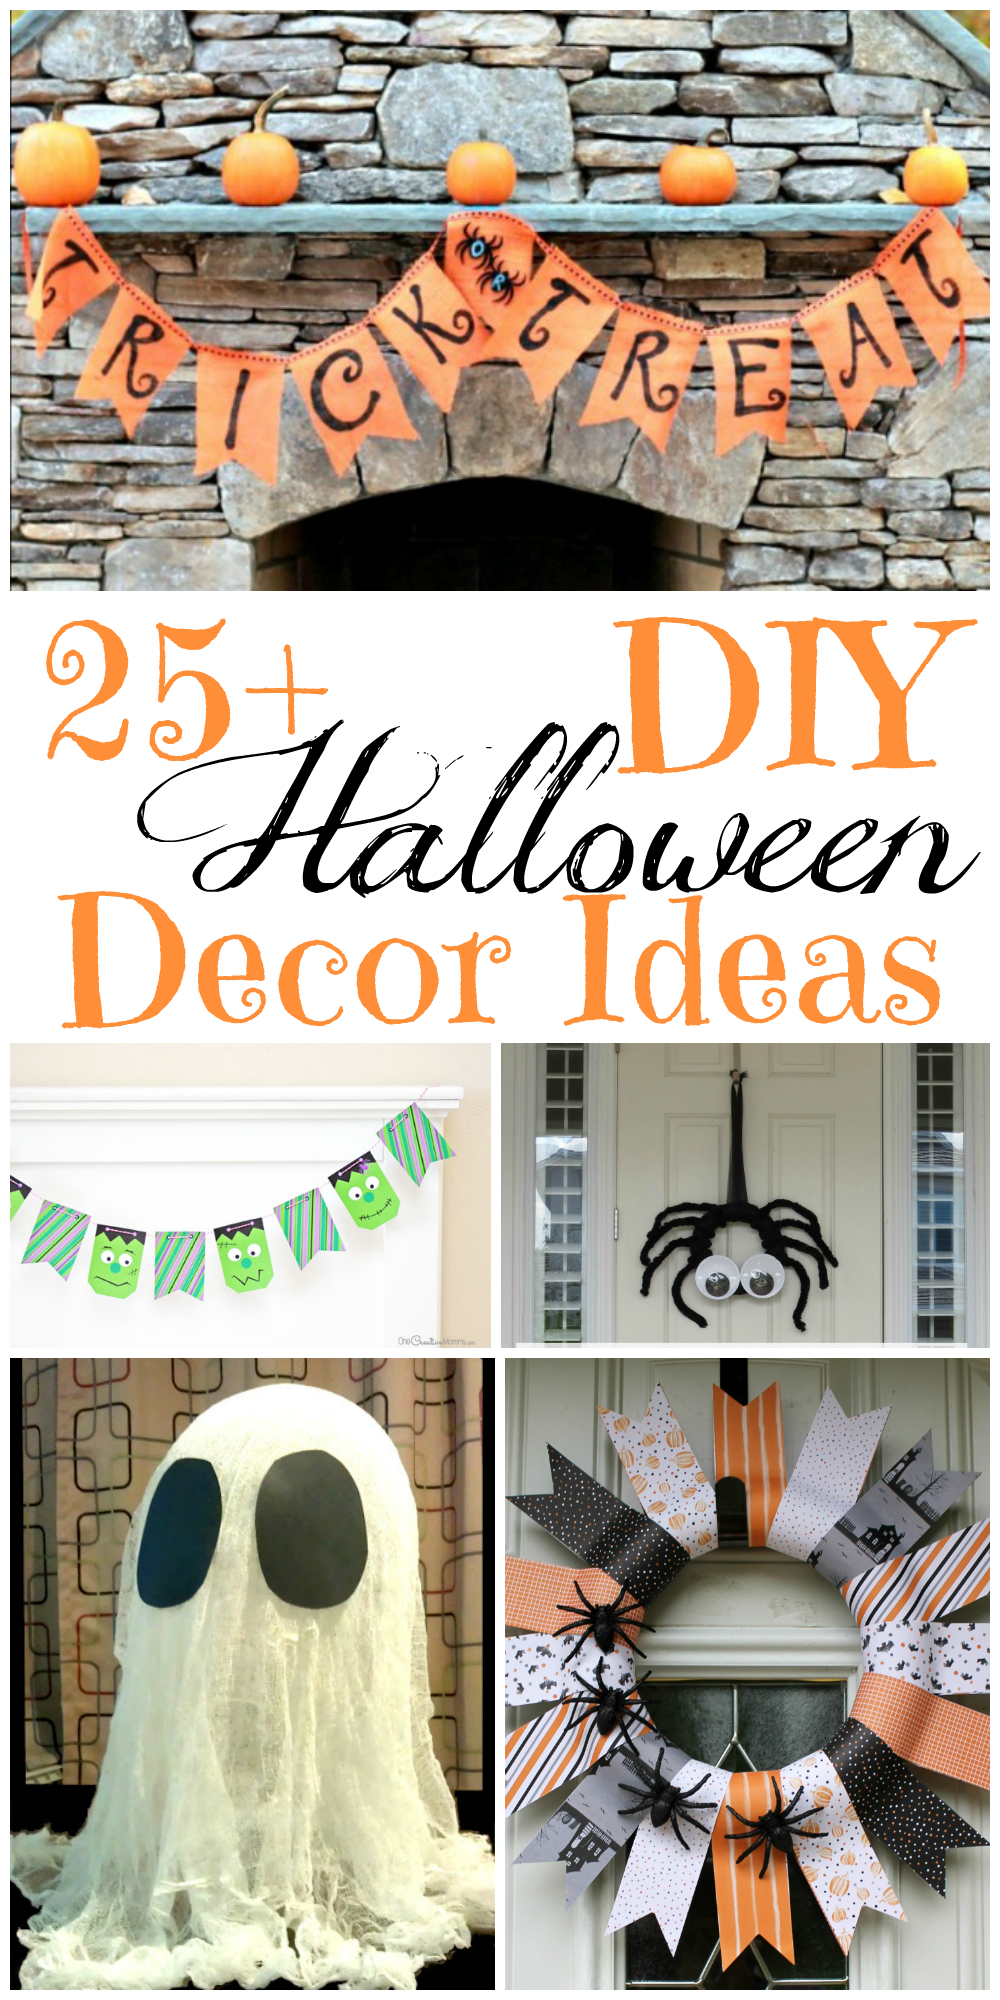 25 Diy Halloween Decor Ideas - Outnumbered 3 To 1 encequiconcerne 1 Halloween 